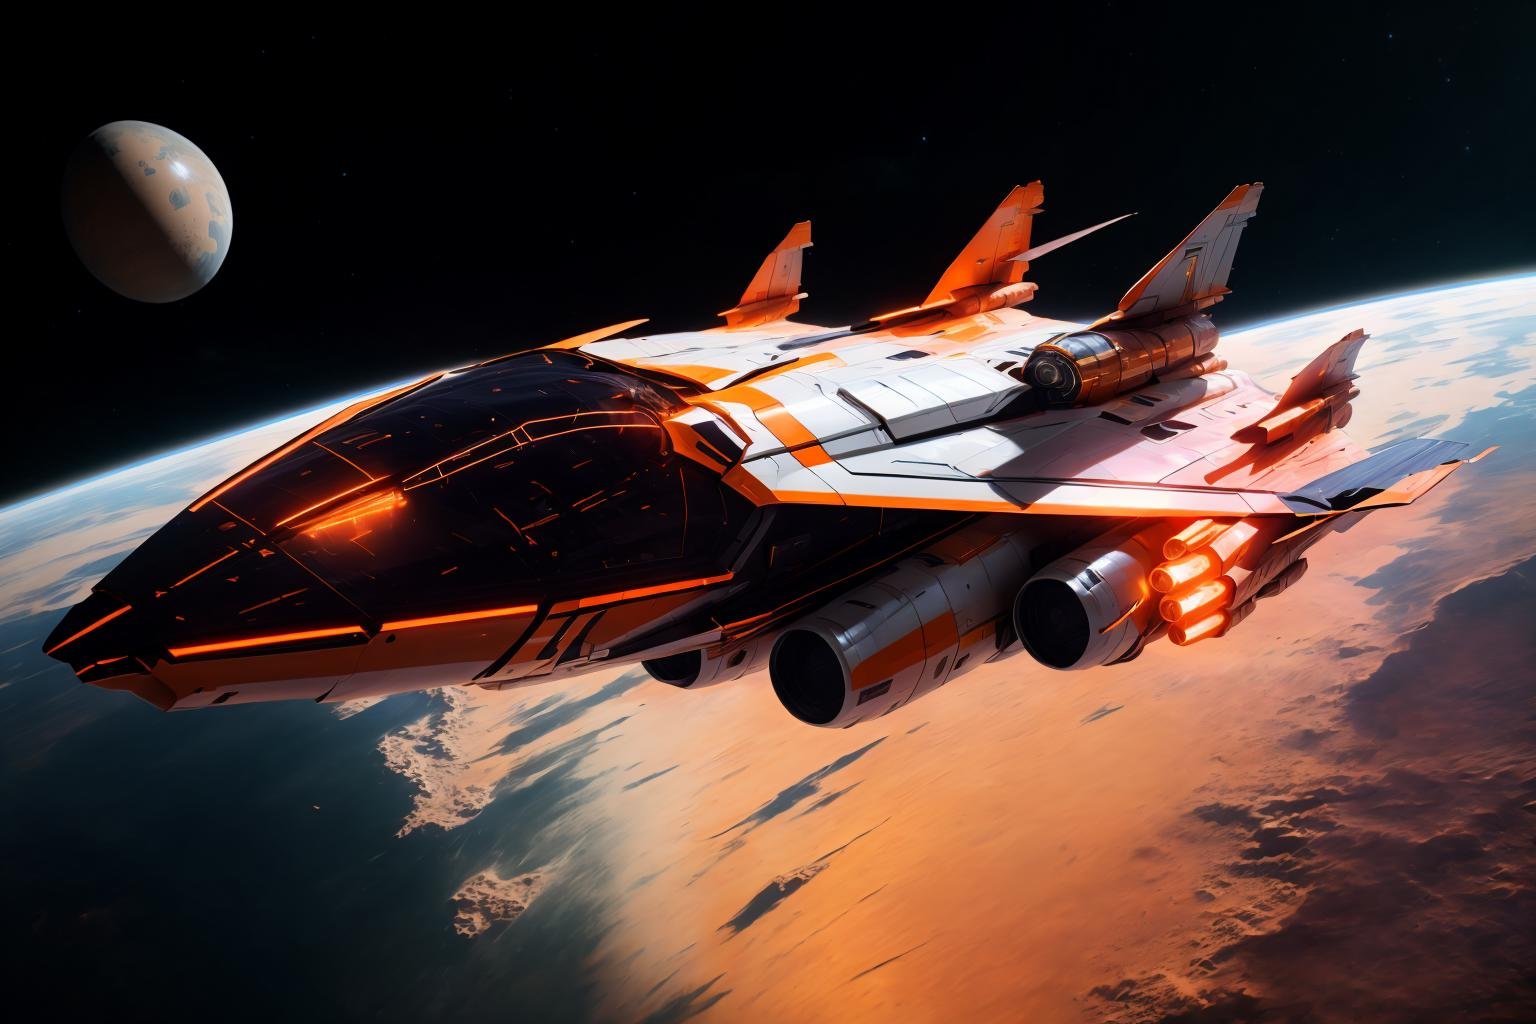 <lora:zxrspc_v3:1> Pumpkin Spice Orange zxrspc, masterpiece, best cinematic quality, photorealistic highly detailed 8k raw photo, volumetric lighting, volumetric shadows, reflective fuselage, A spacewalk outside a spaceship, witnessing the vastness of space and the Earth below